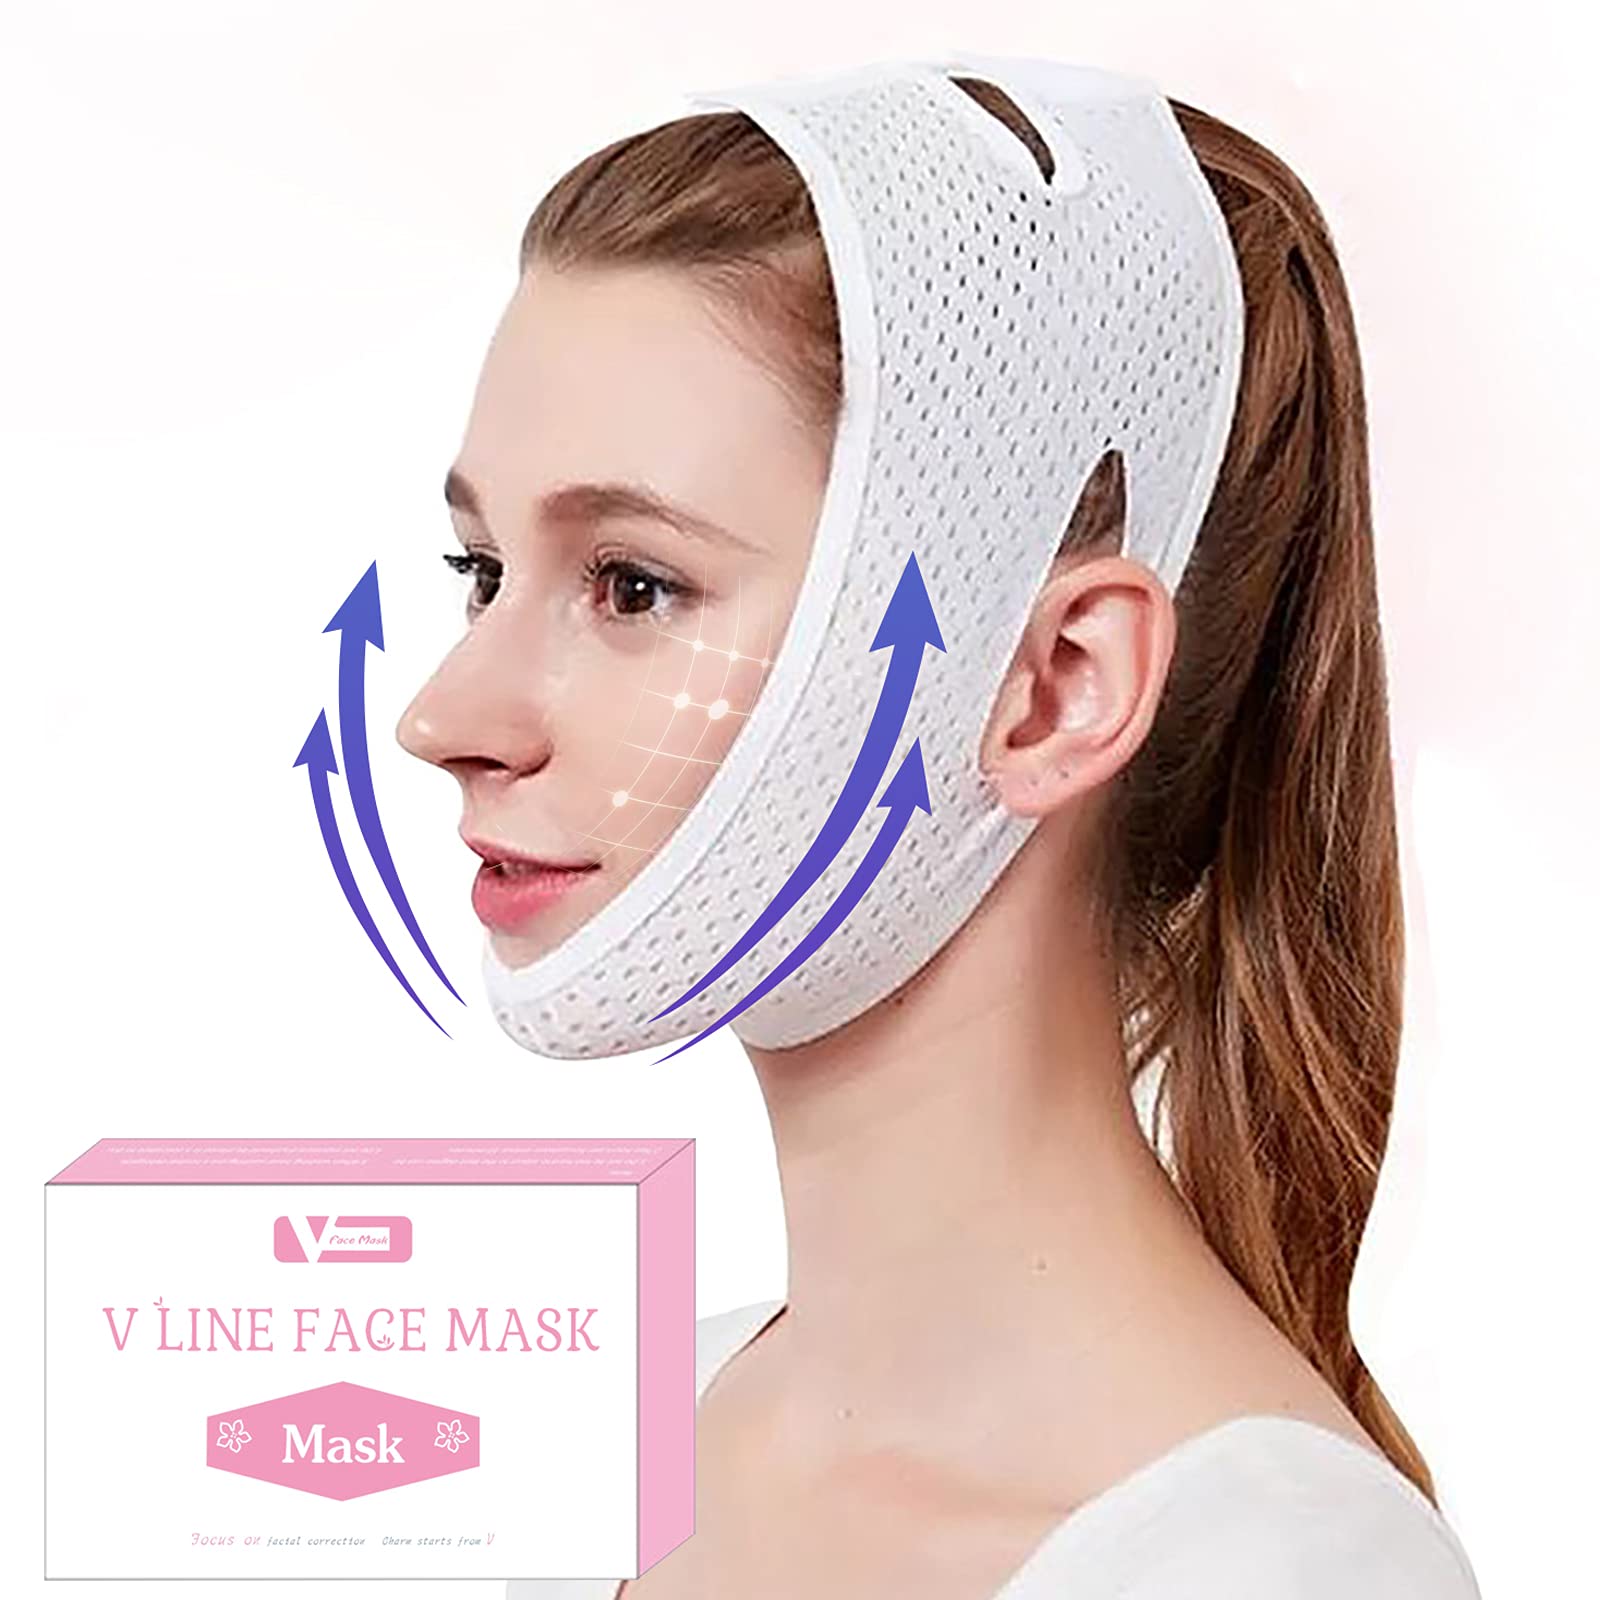 V Line Lifting Mask Face Slimming Strap Jawline Shaper Double Chin